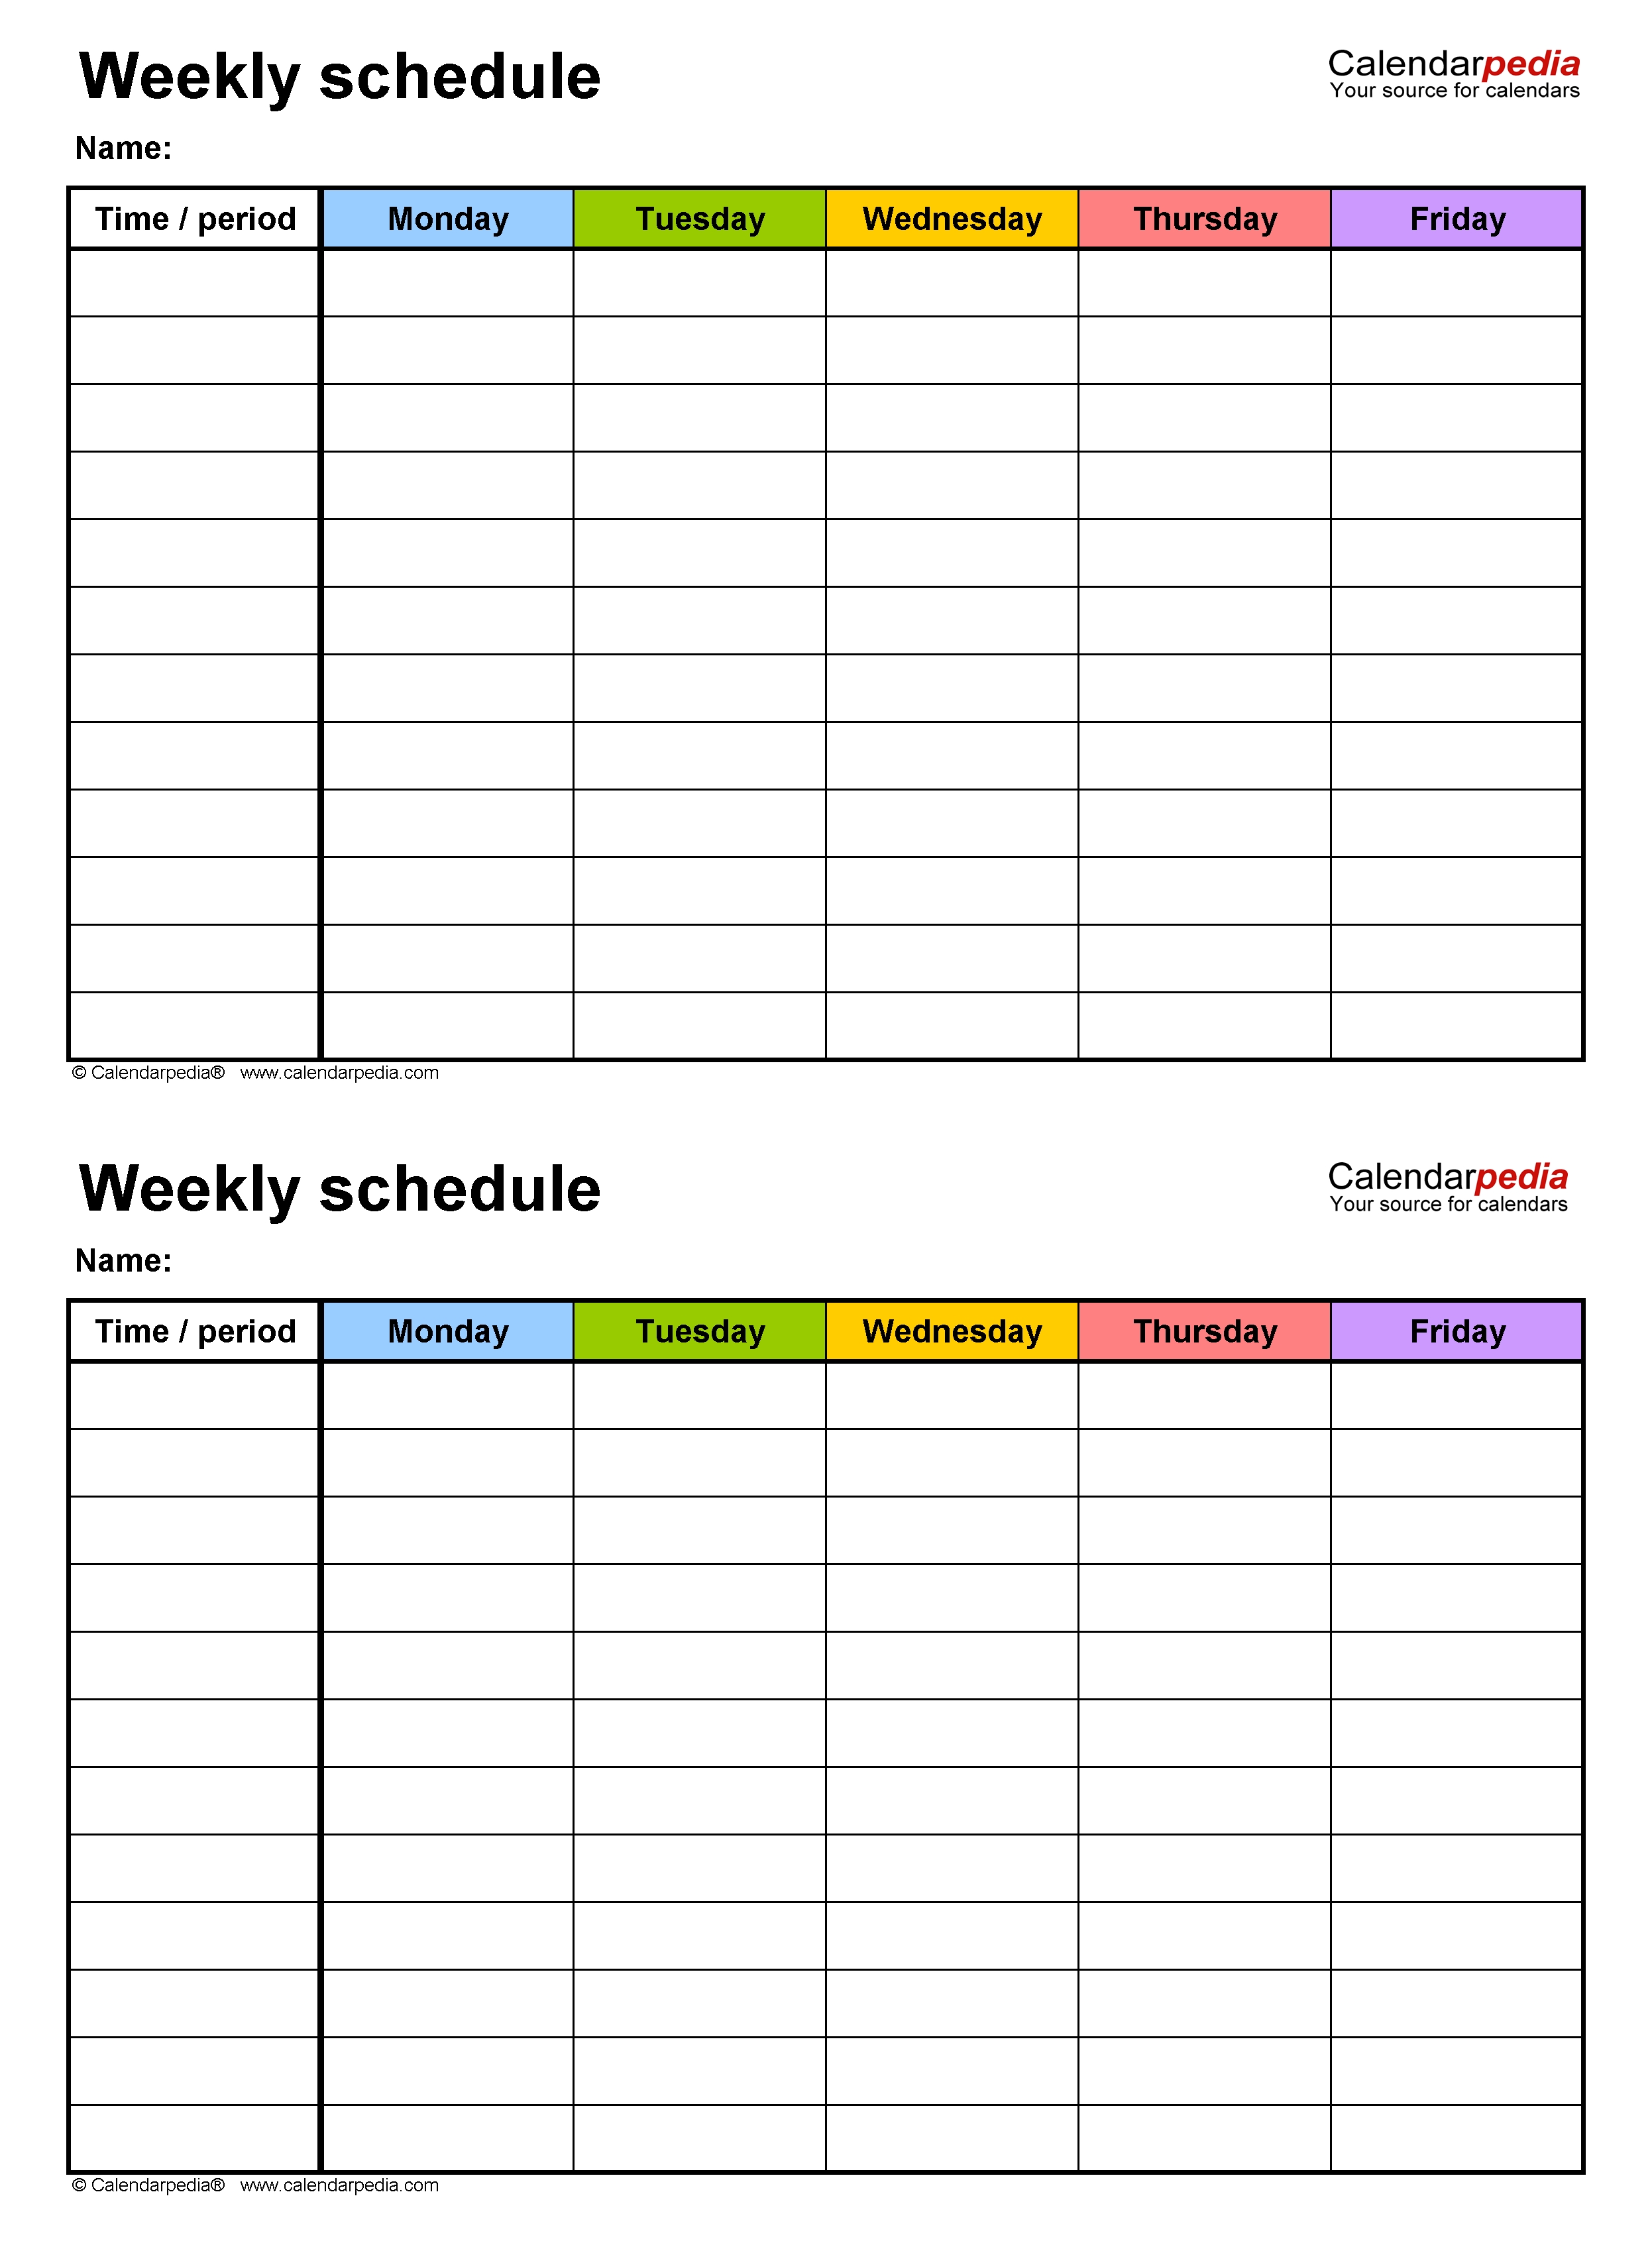 Free Weekly Schedule Templates For Excel - 18 Templates 4 Person Calendar Template